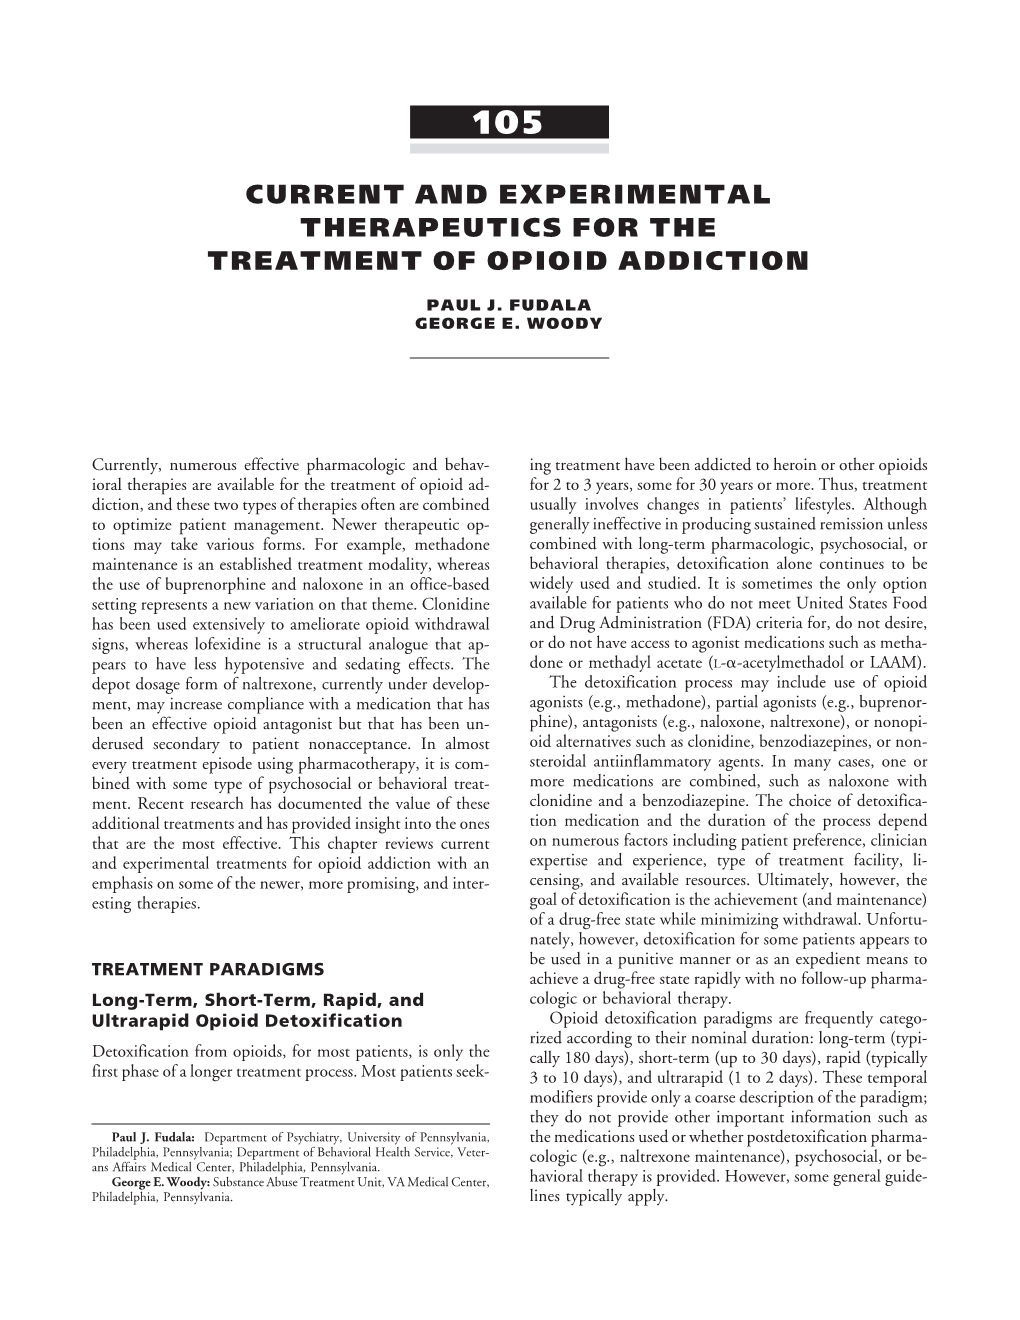 Current and Experimental Therapeutics for the Treatment of Opioid Addiction